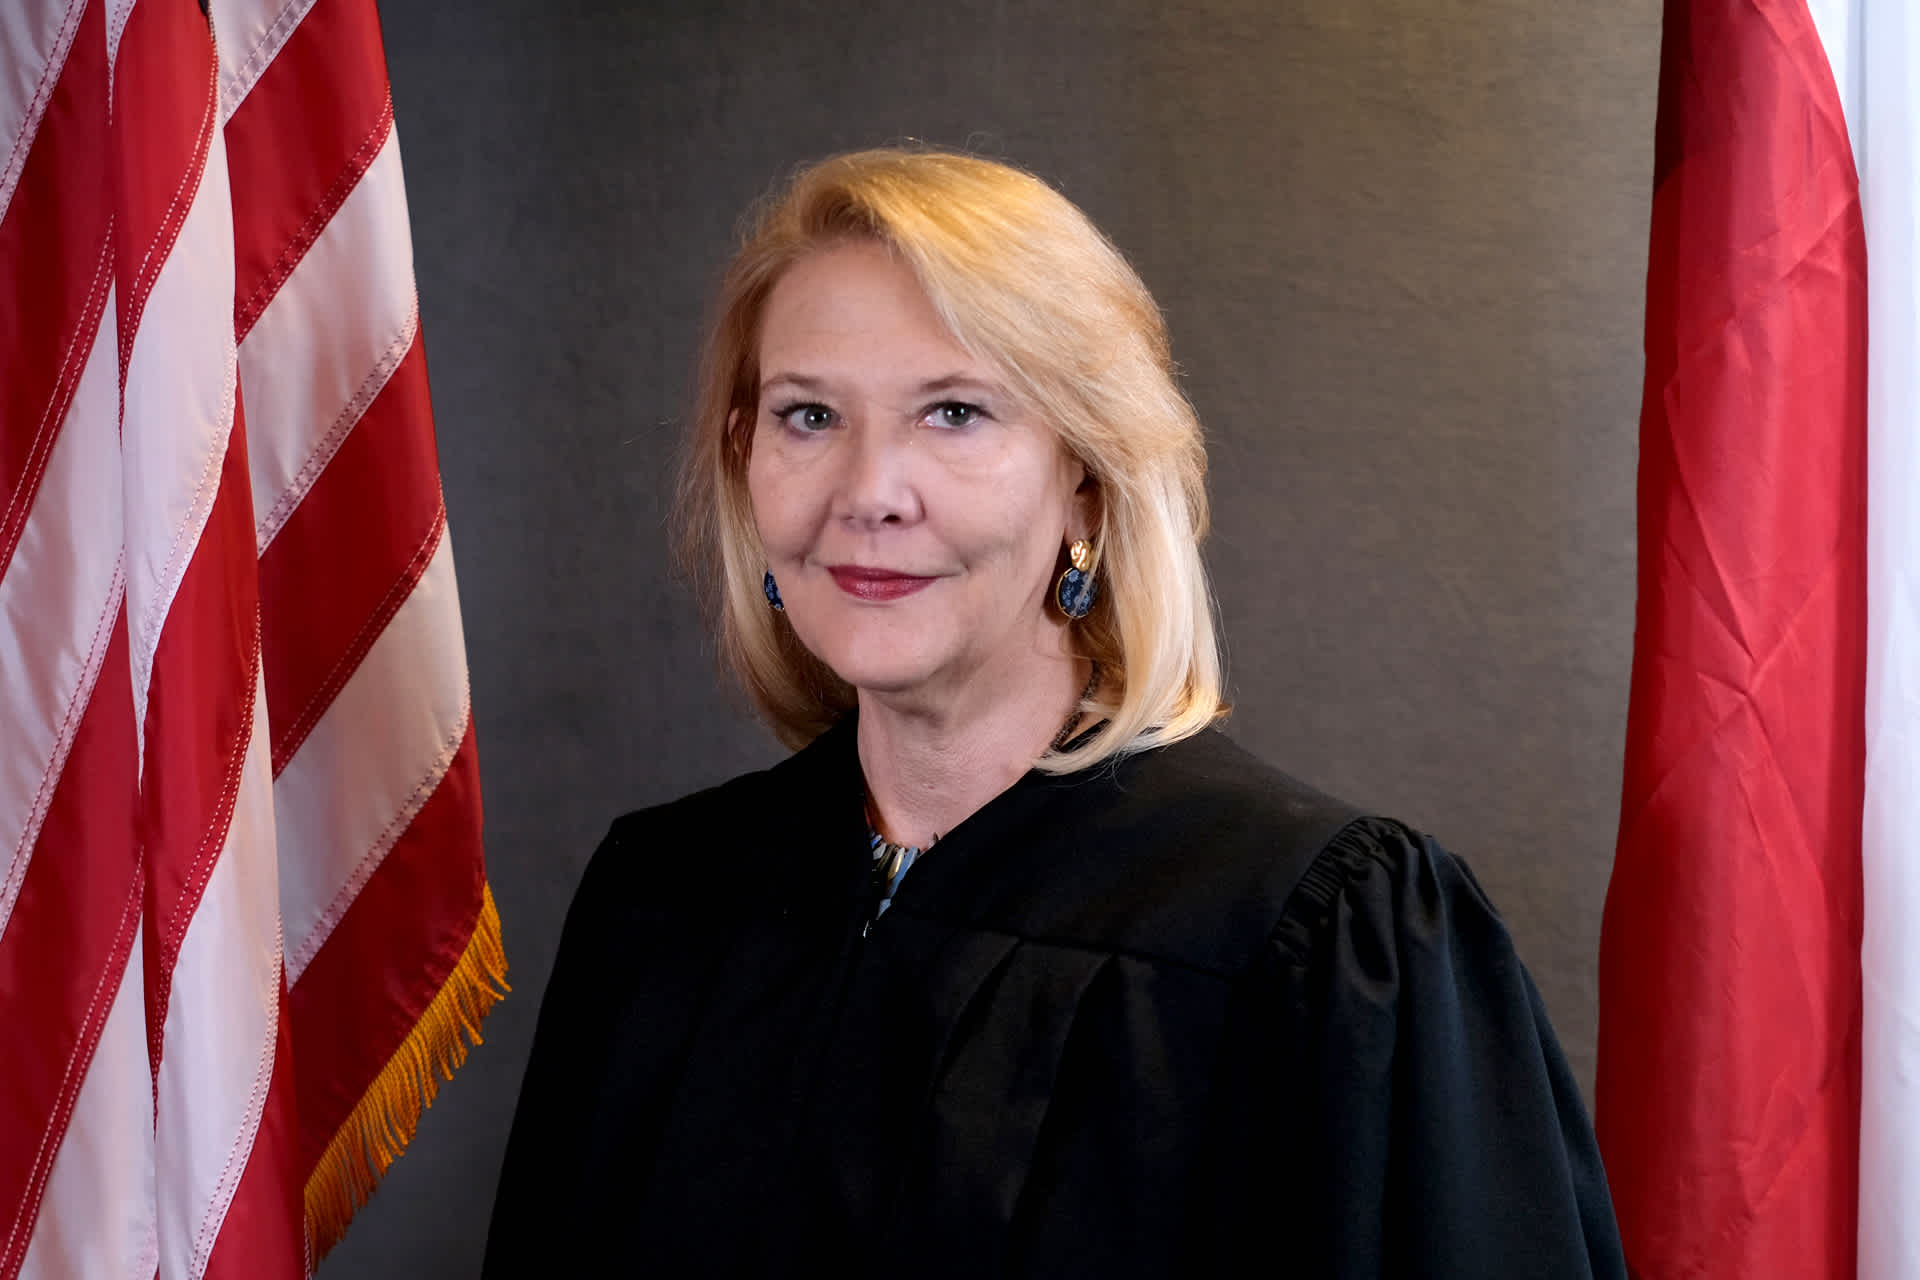 A female judge with blonde hair poses between two flags.